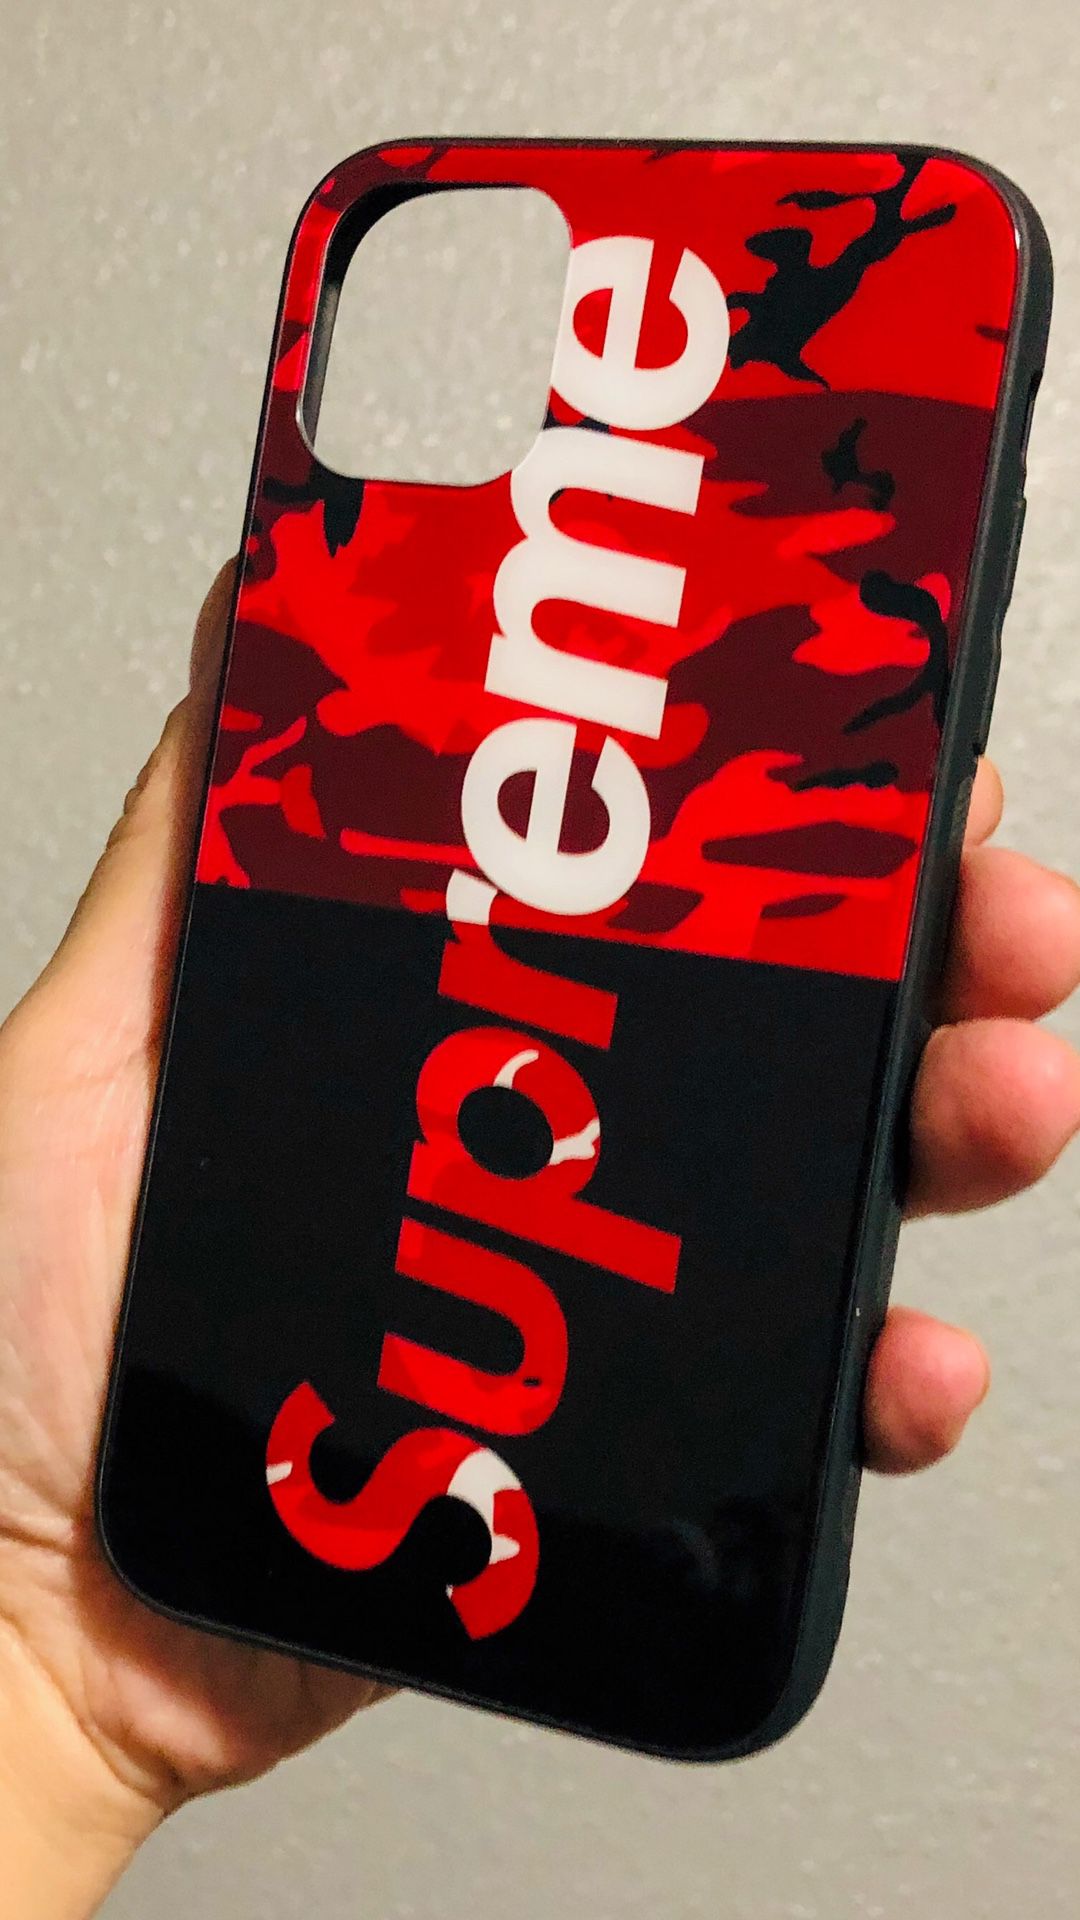 Brand new in package iphone 11 REGULAR 6.1 case cover rubber tempered glass SUPREME CAMO case